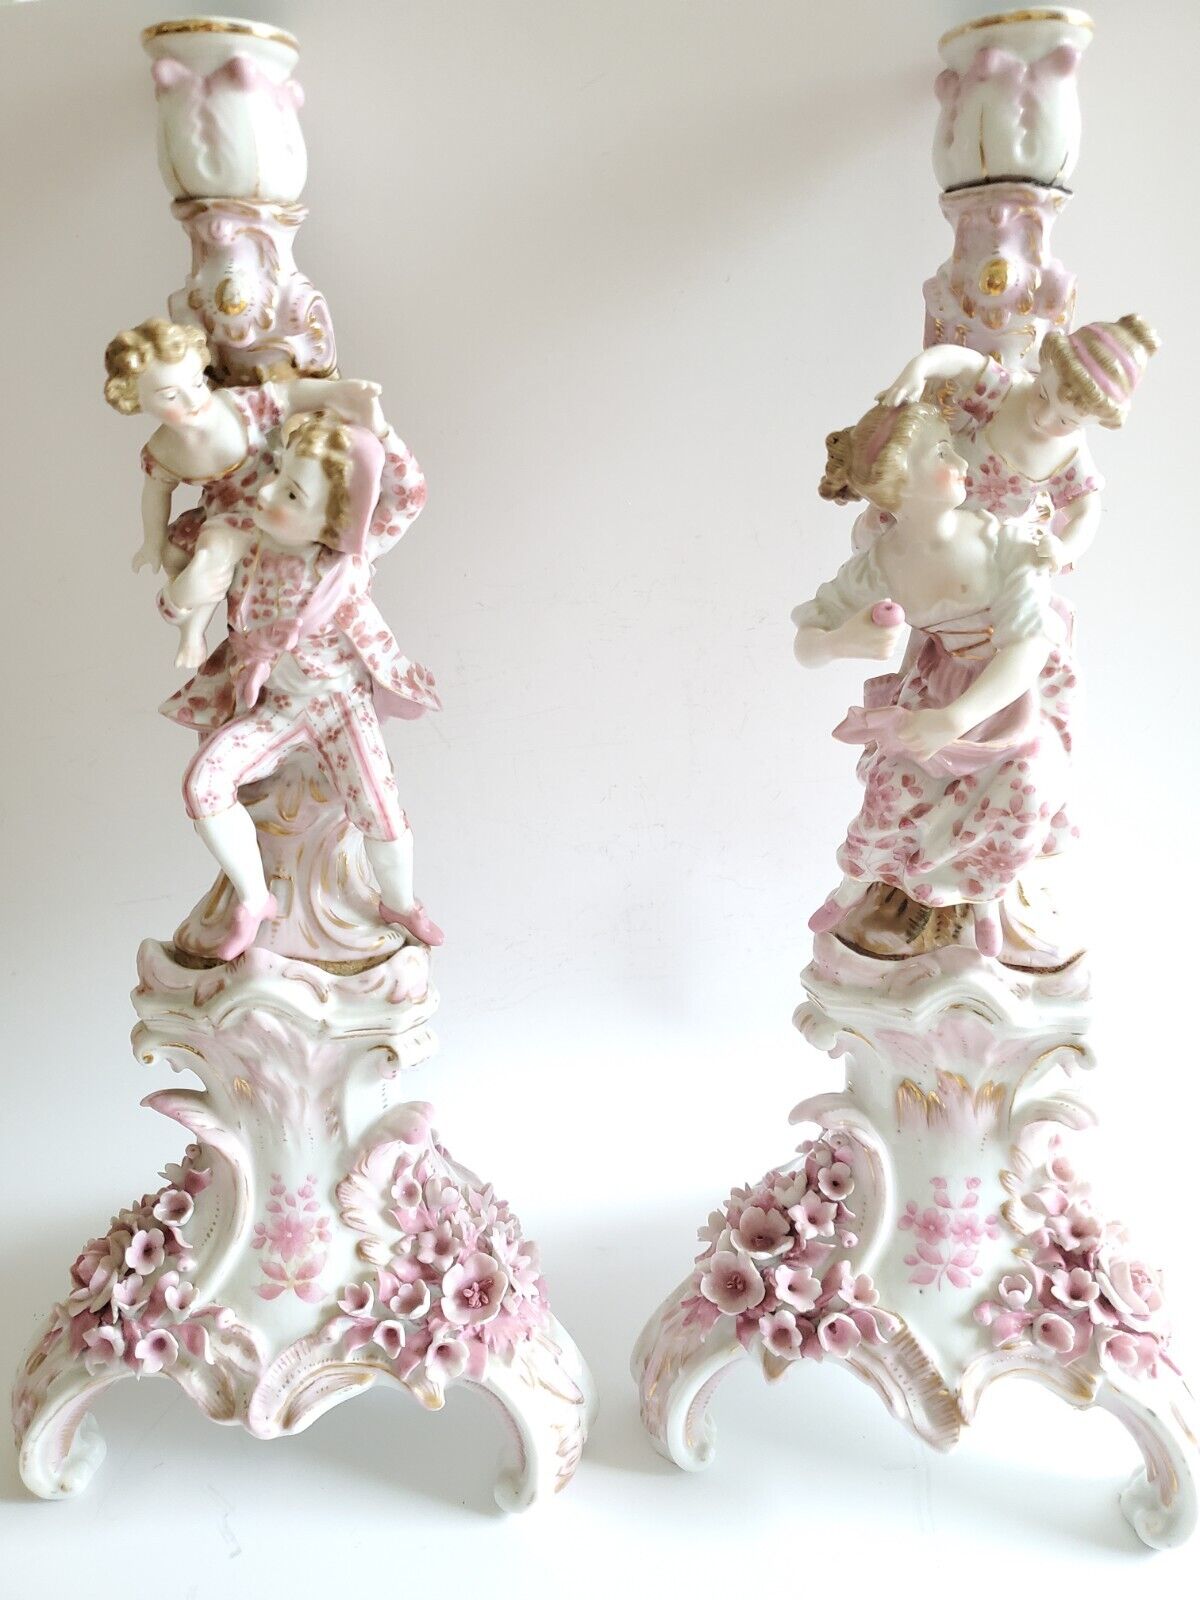 Antique Alfred Voigt Sitzendorf Pair Of Porcelain Candlesticks with Figurines